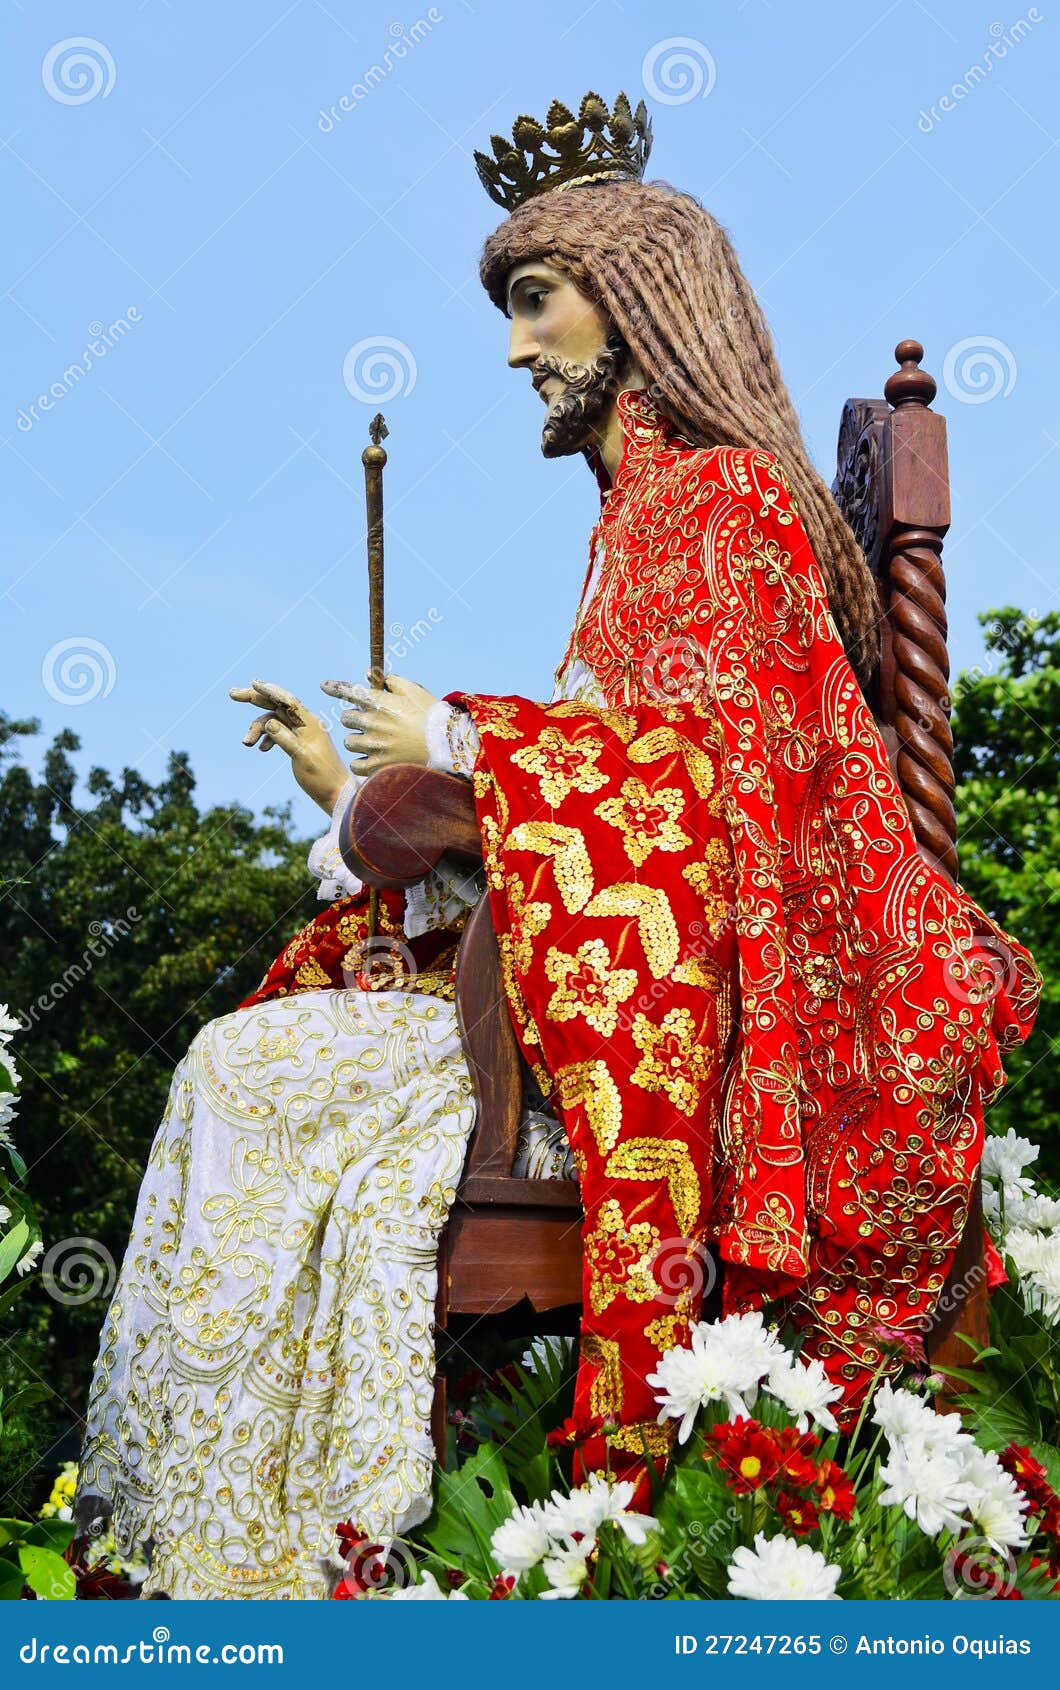 Christ the King stock image. Image of flower, lord, redemeer ...